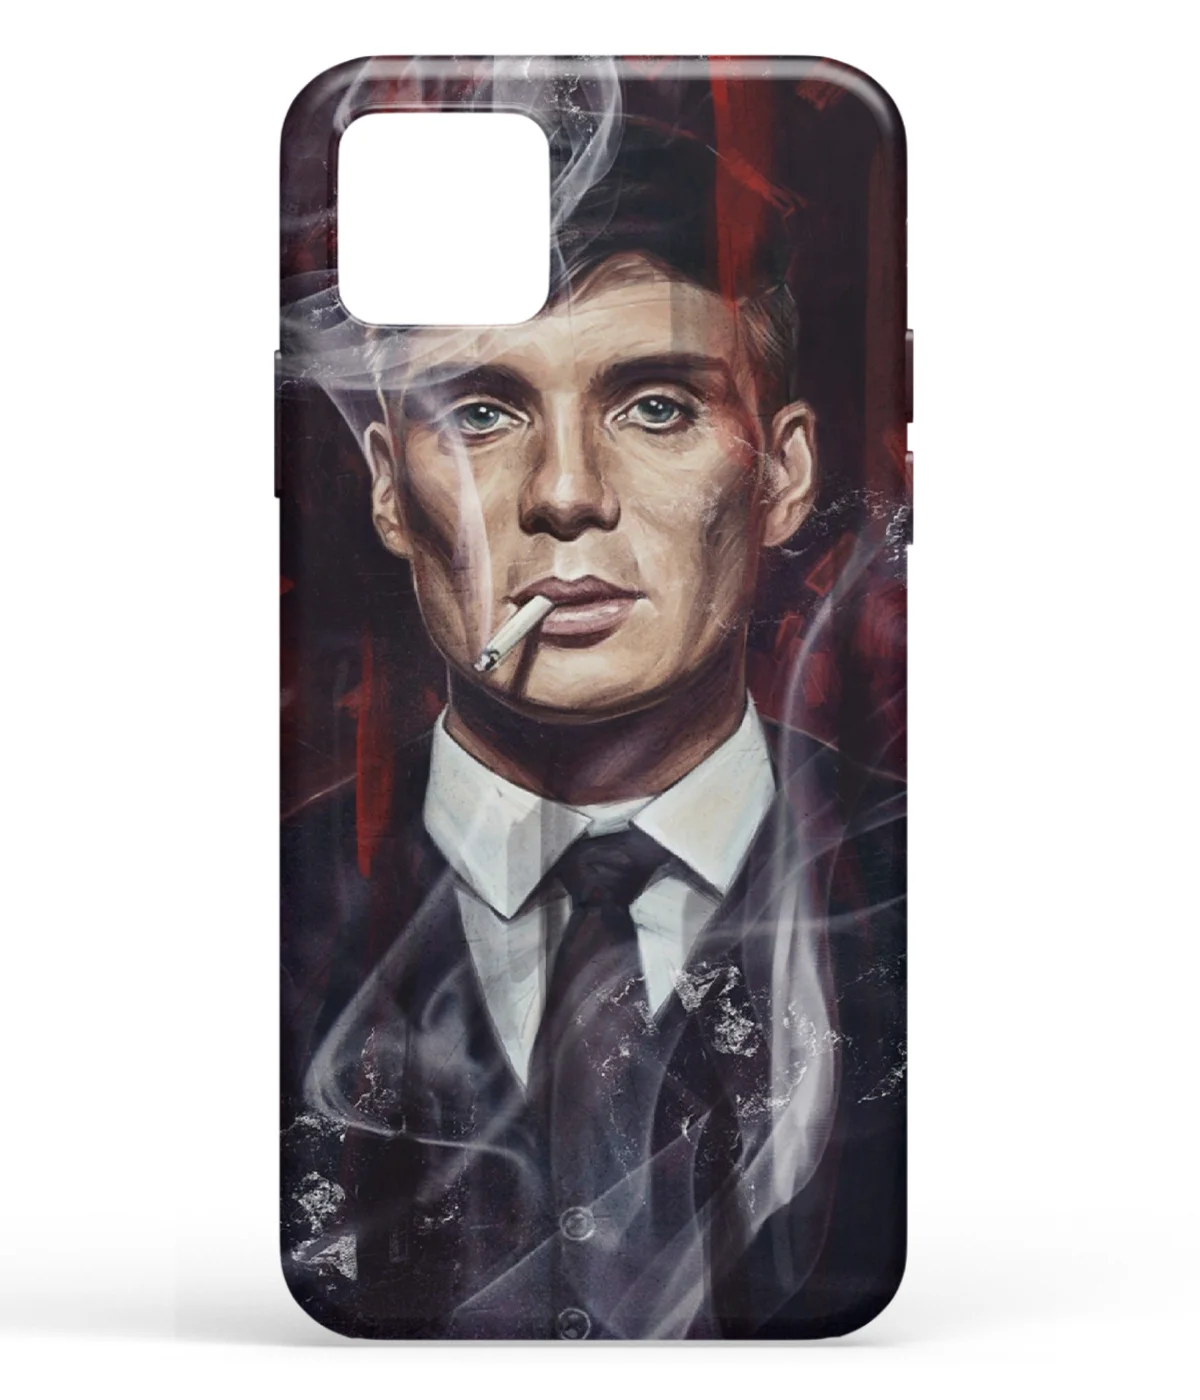 Thomas Shelby Art Printed Soft Silicone Back Cover